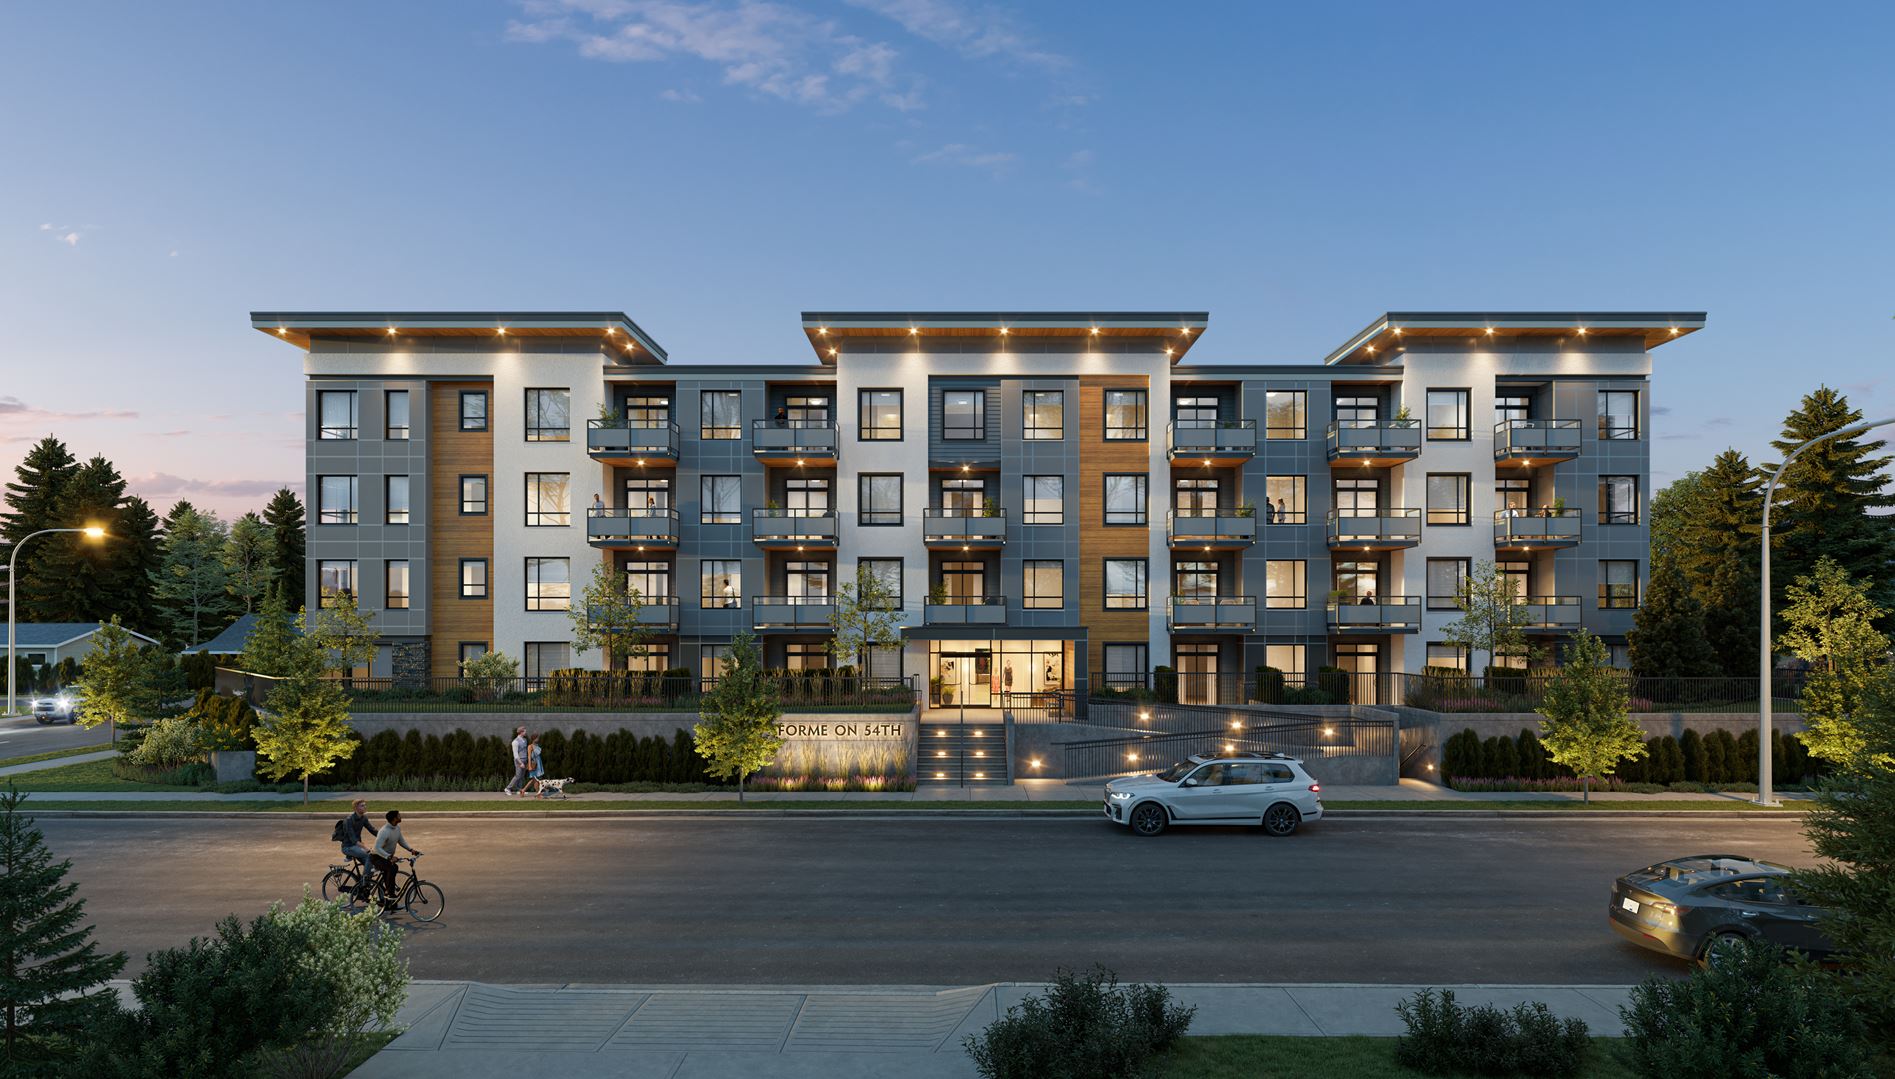 A collection of 62 1- and 2-bedroom Langley City condominiums starting at $299,900.